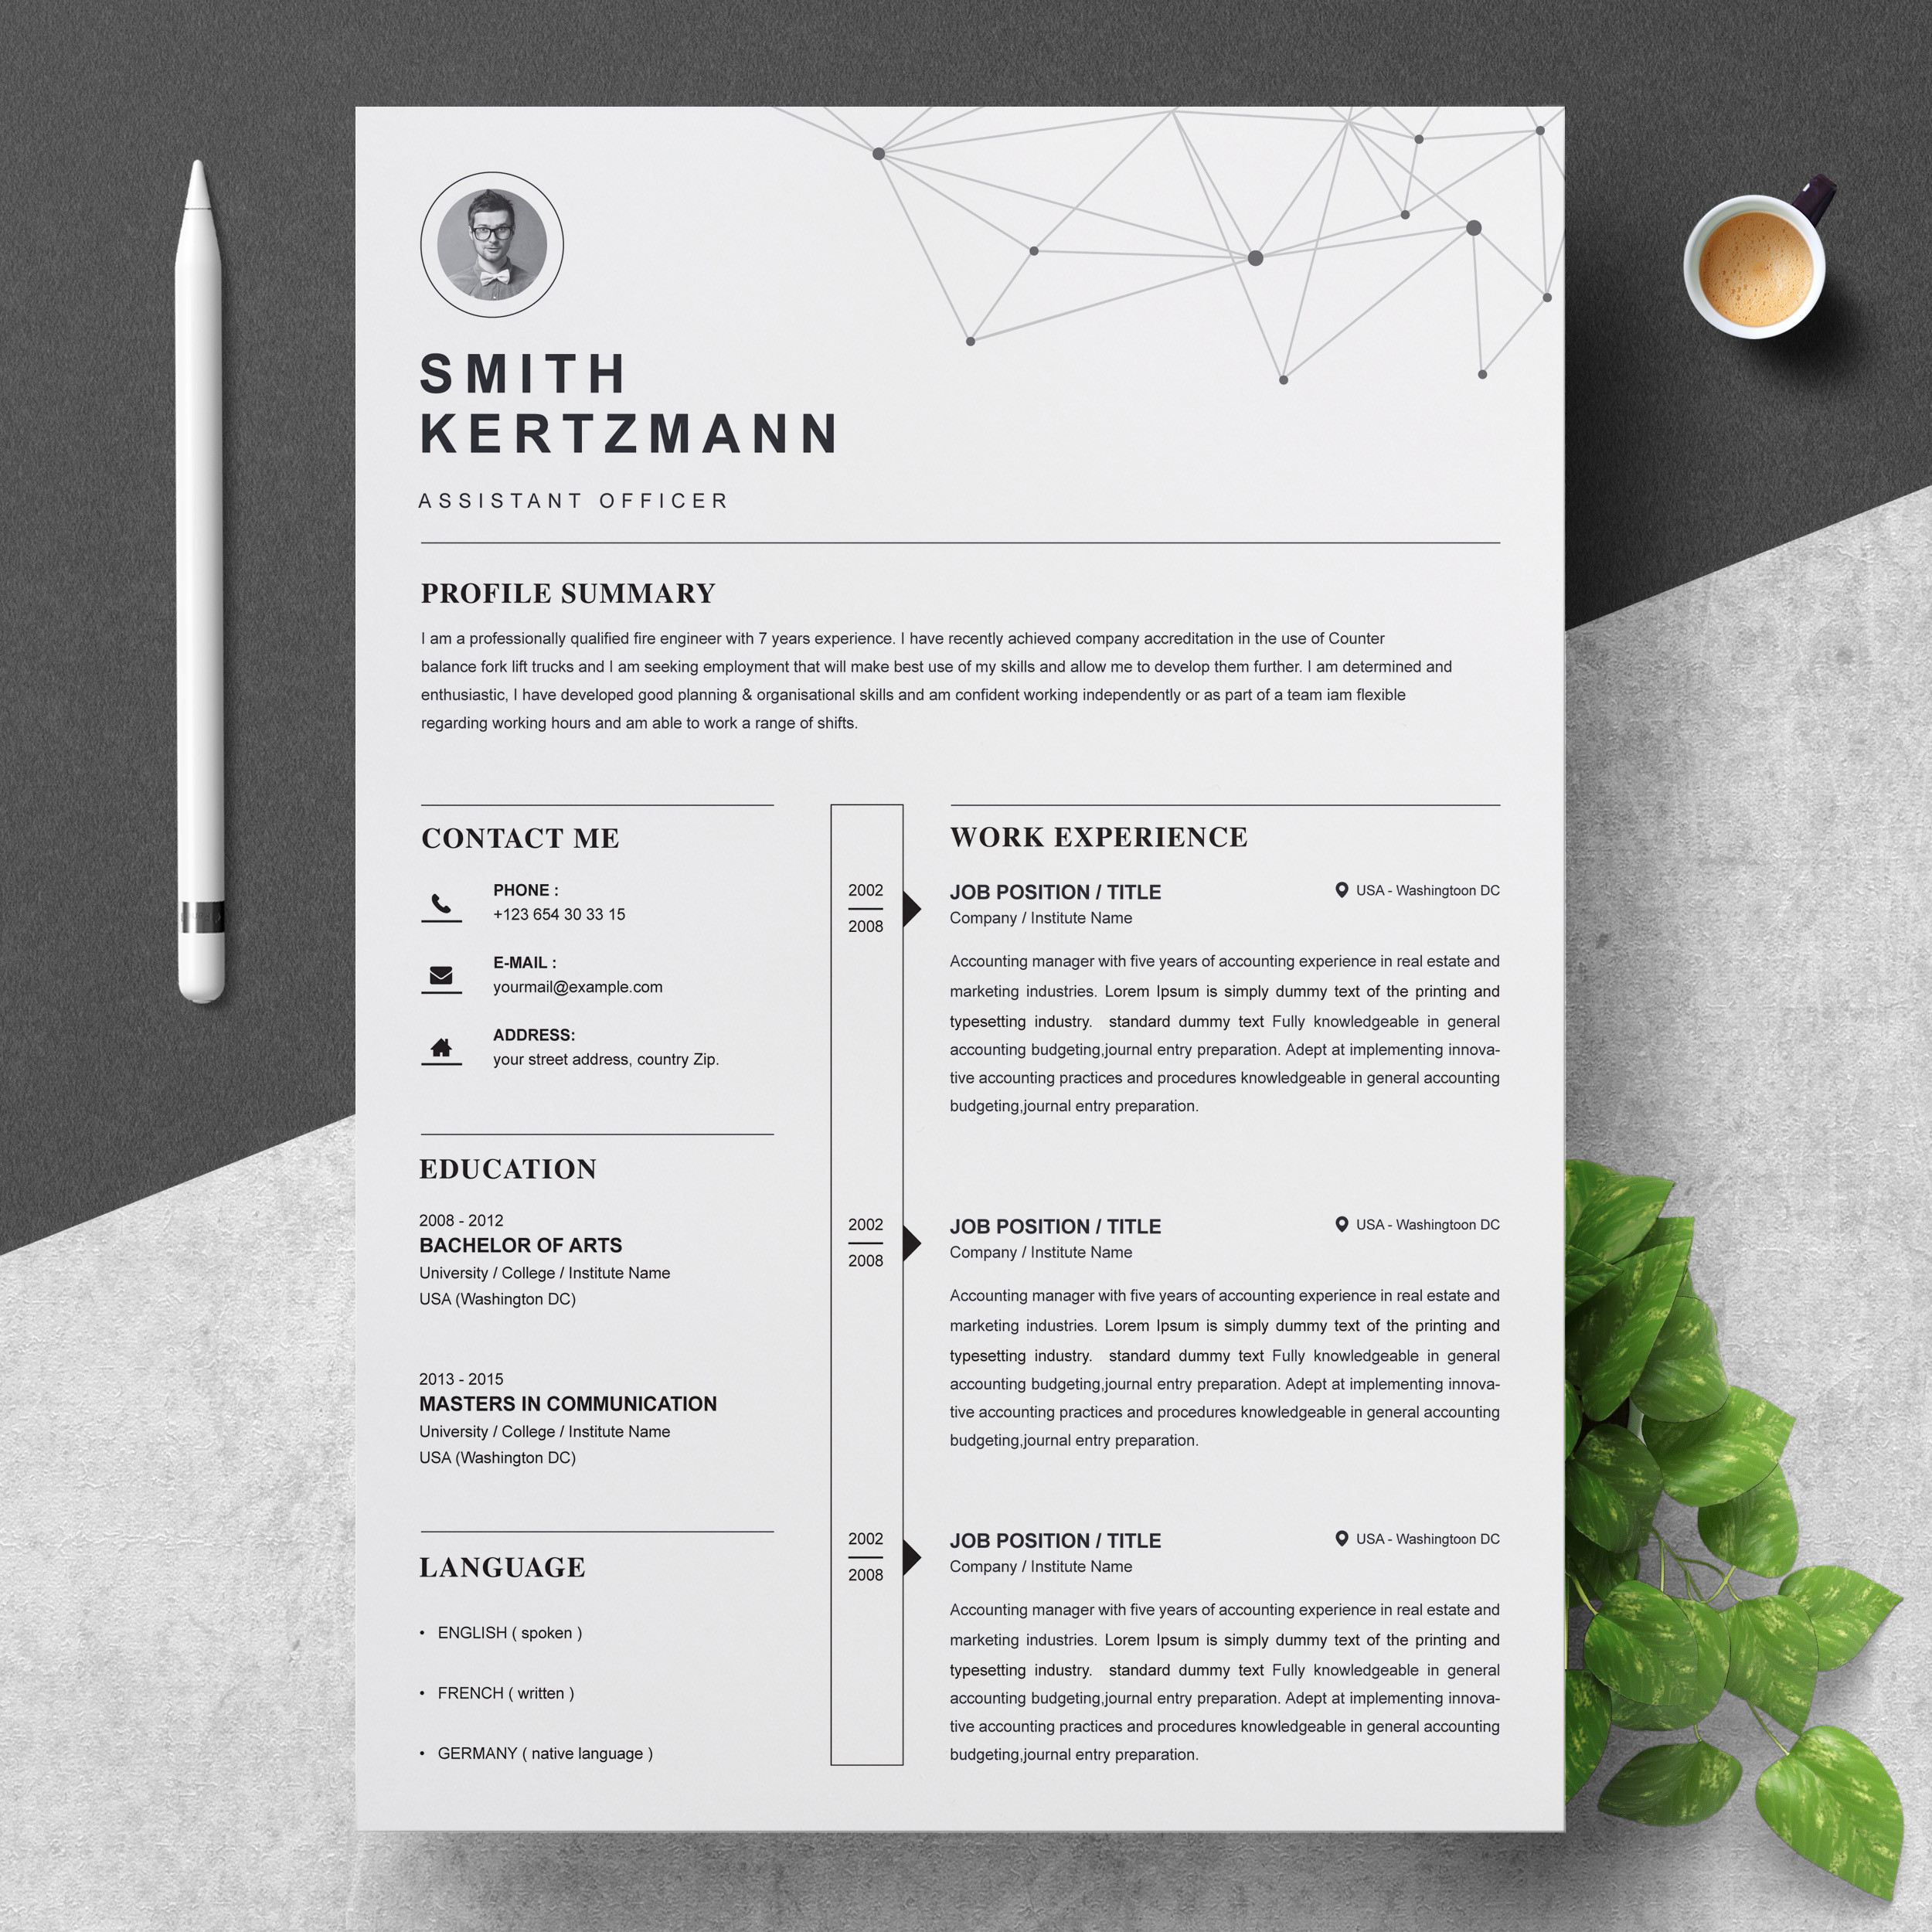 Free Resume Templates Online to Print Professional Resume Template â Free Resumes, Templates Pixelify.net